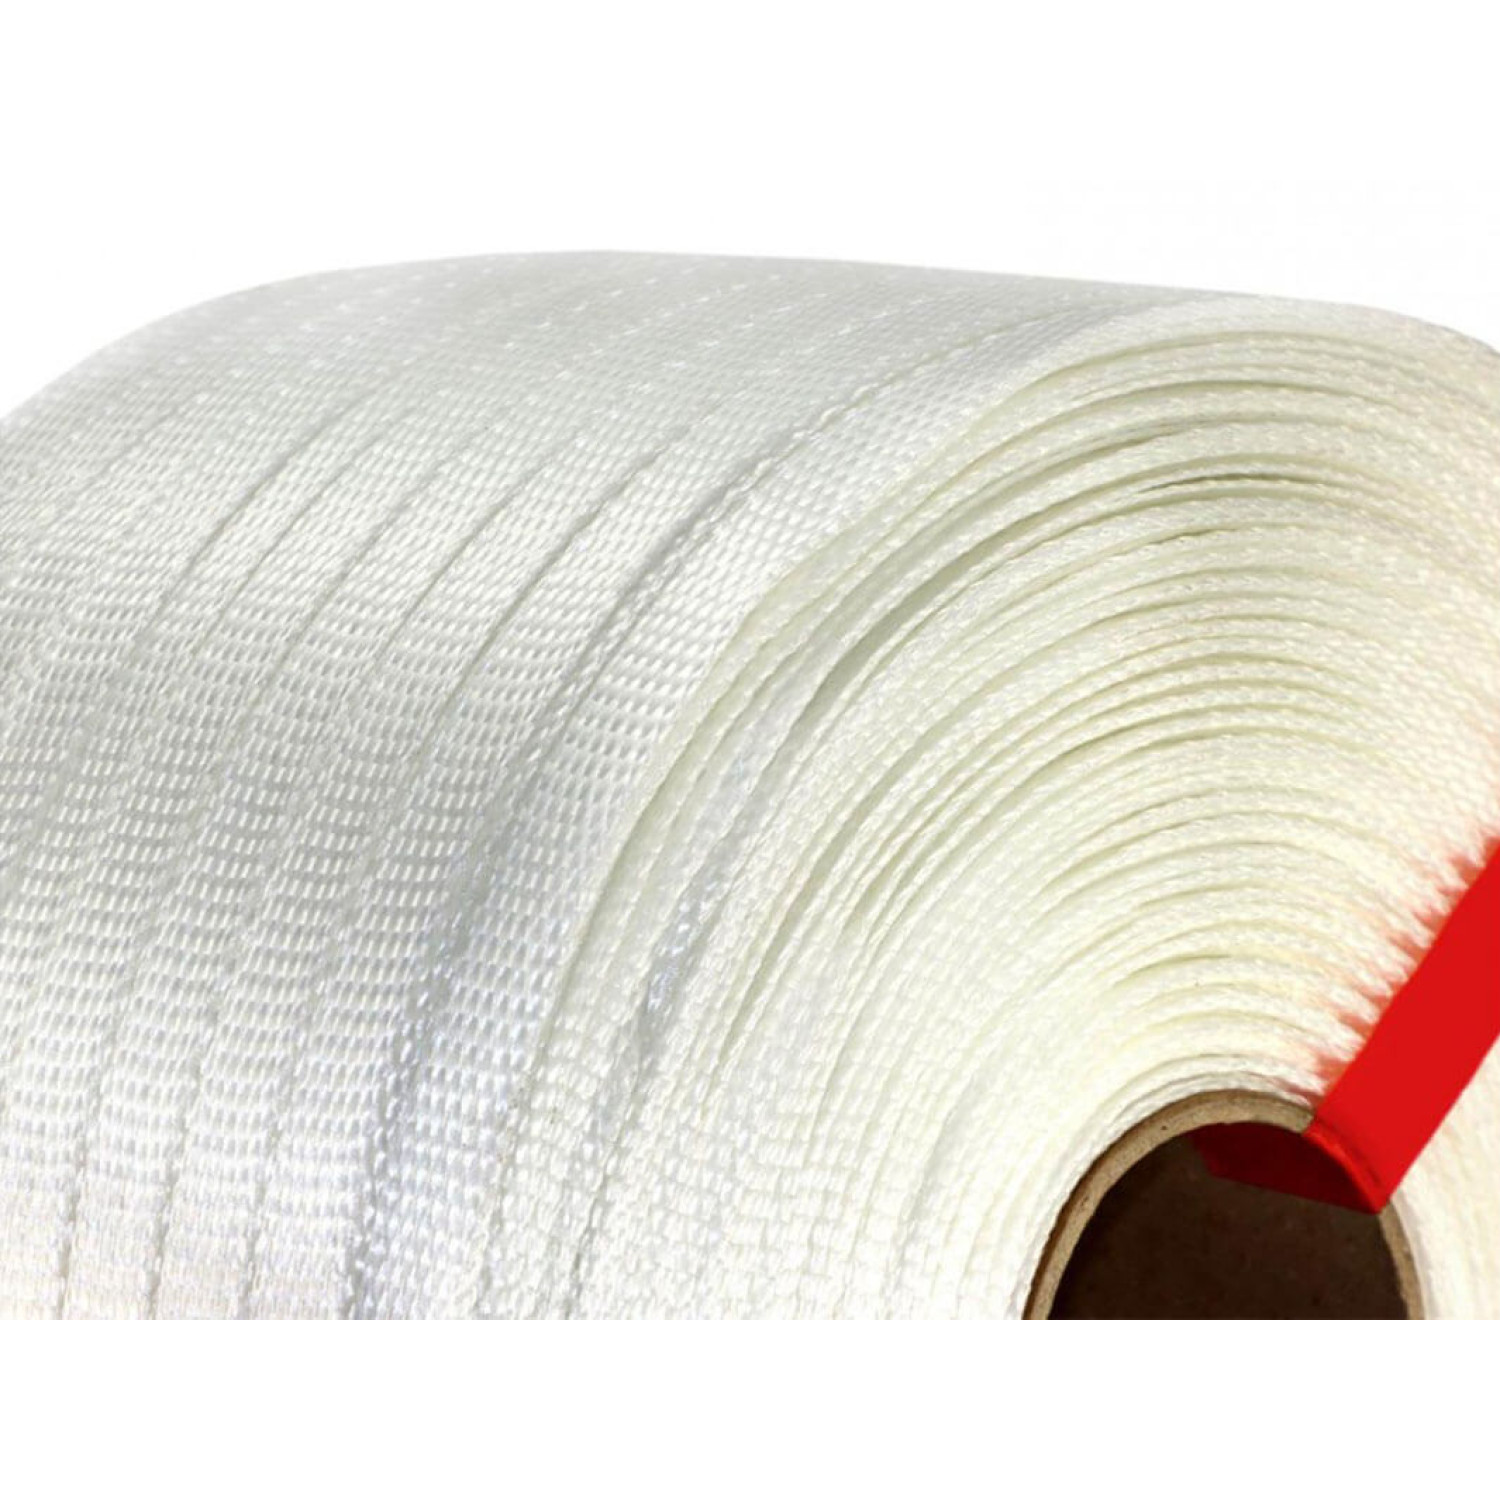 Woven Cord Strapping | 1/2 in. x 1500' Polyester Strap